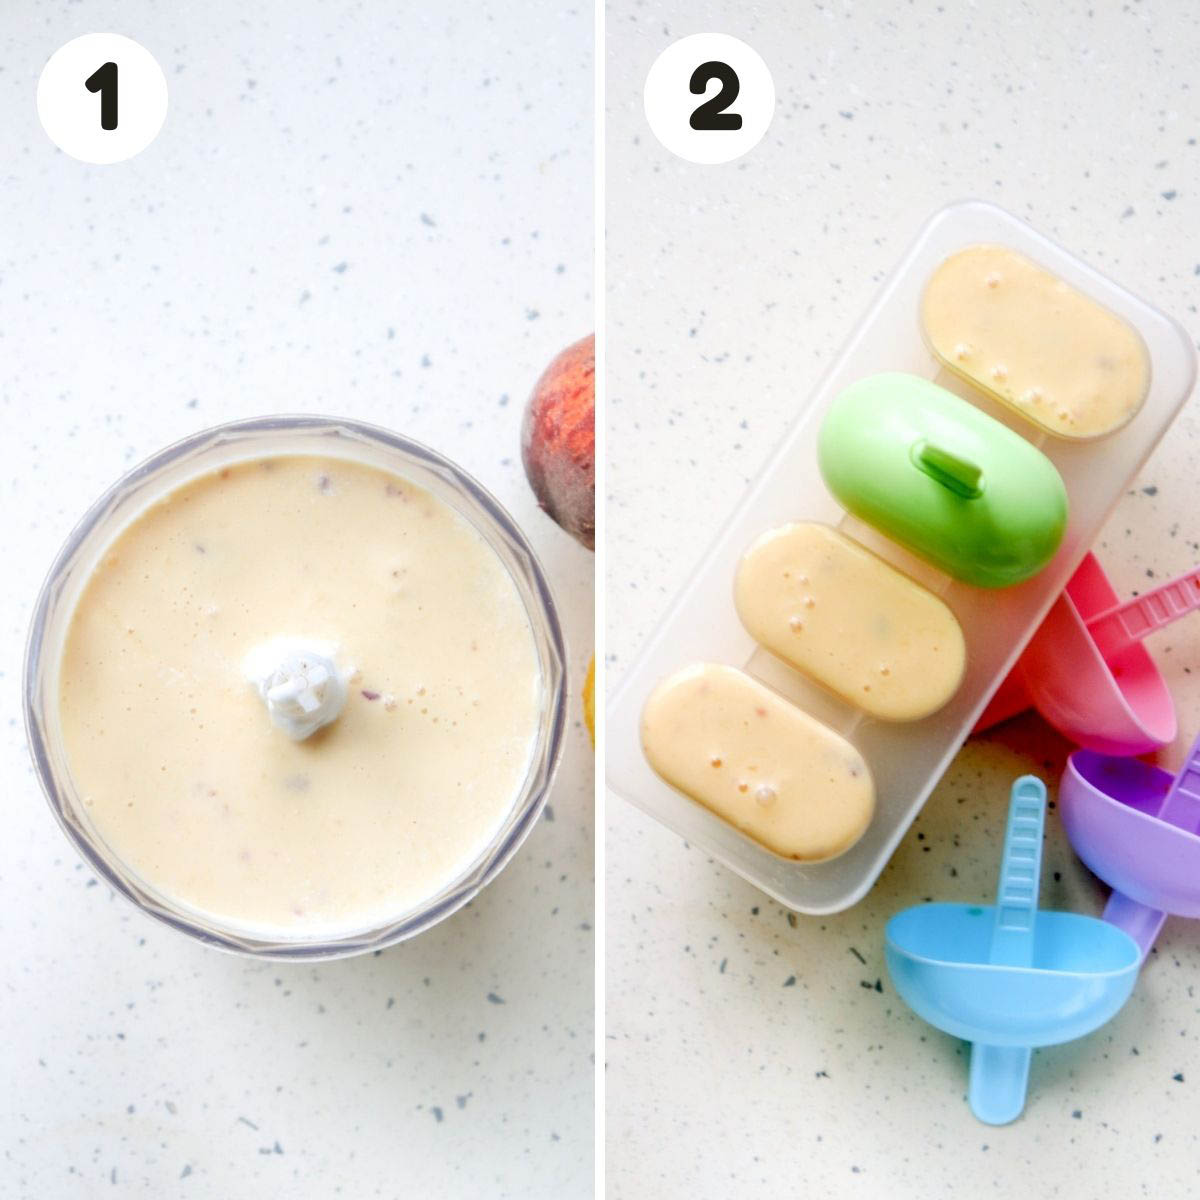 Steps to make the peach popsicles.